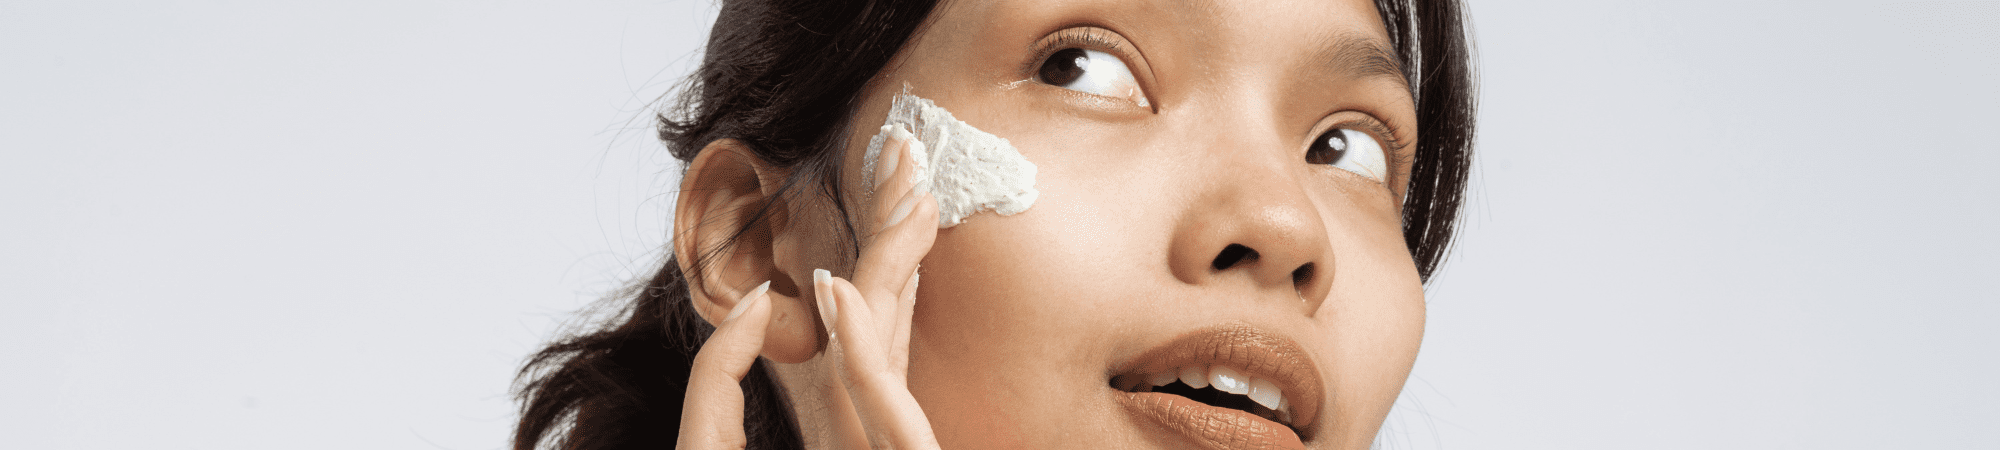 Revitalising legacy skincare ingredients: A guide for beauty brands